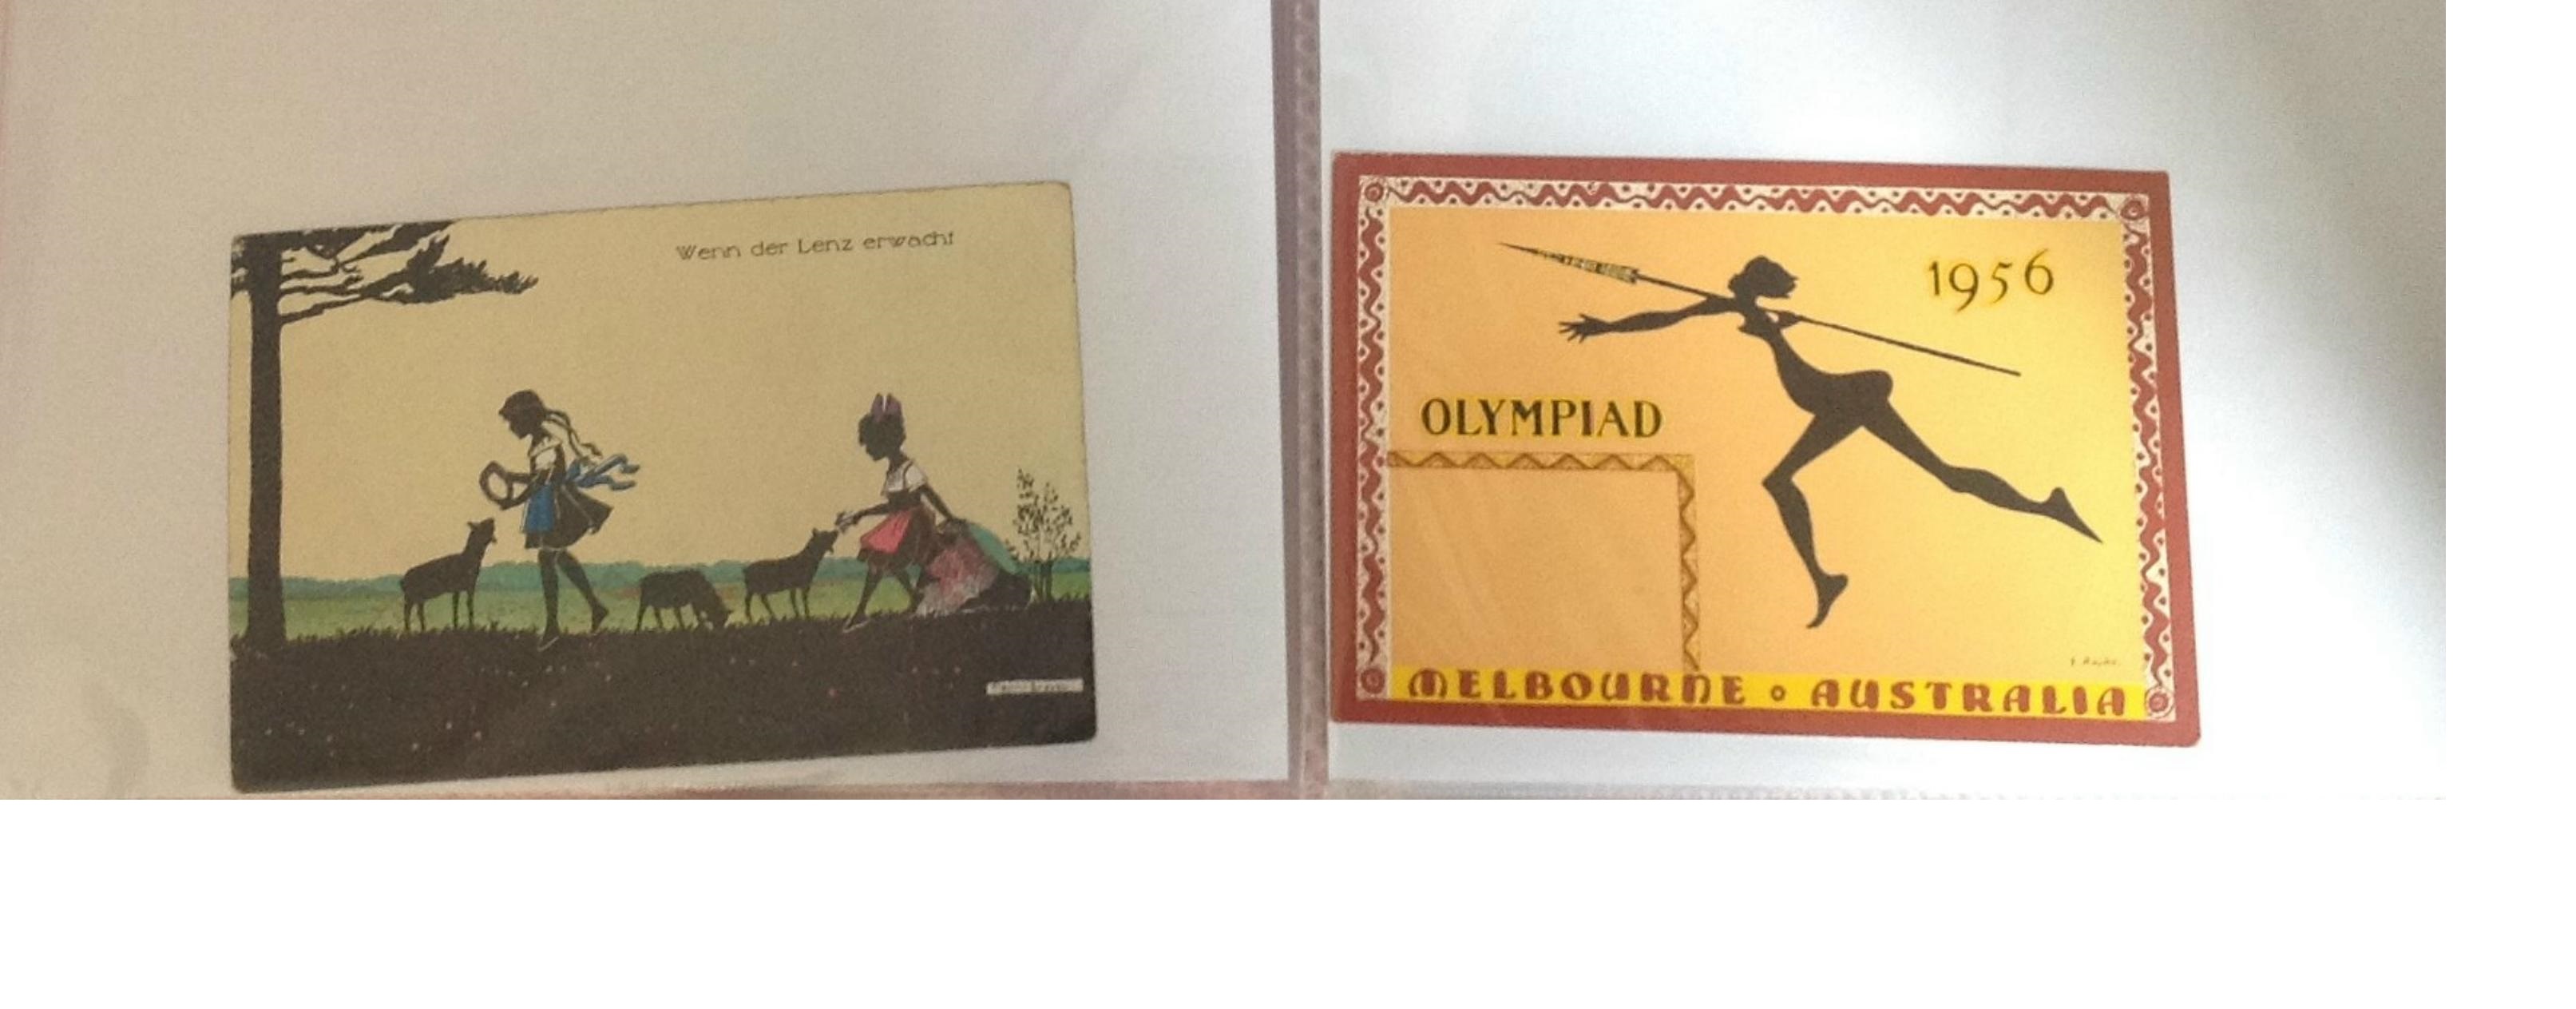 Silhouette collection includes 9 items on stamped envelopes, 13 items on postcards some very old and - Image 5 of 5